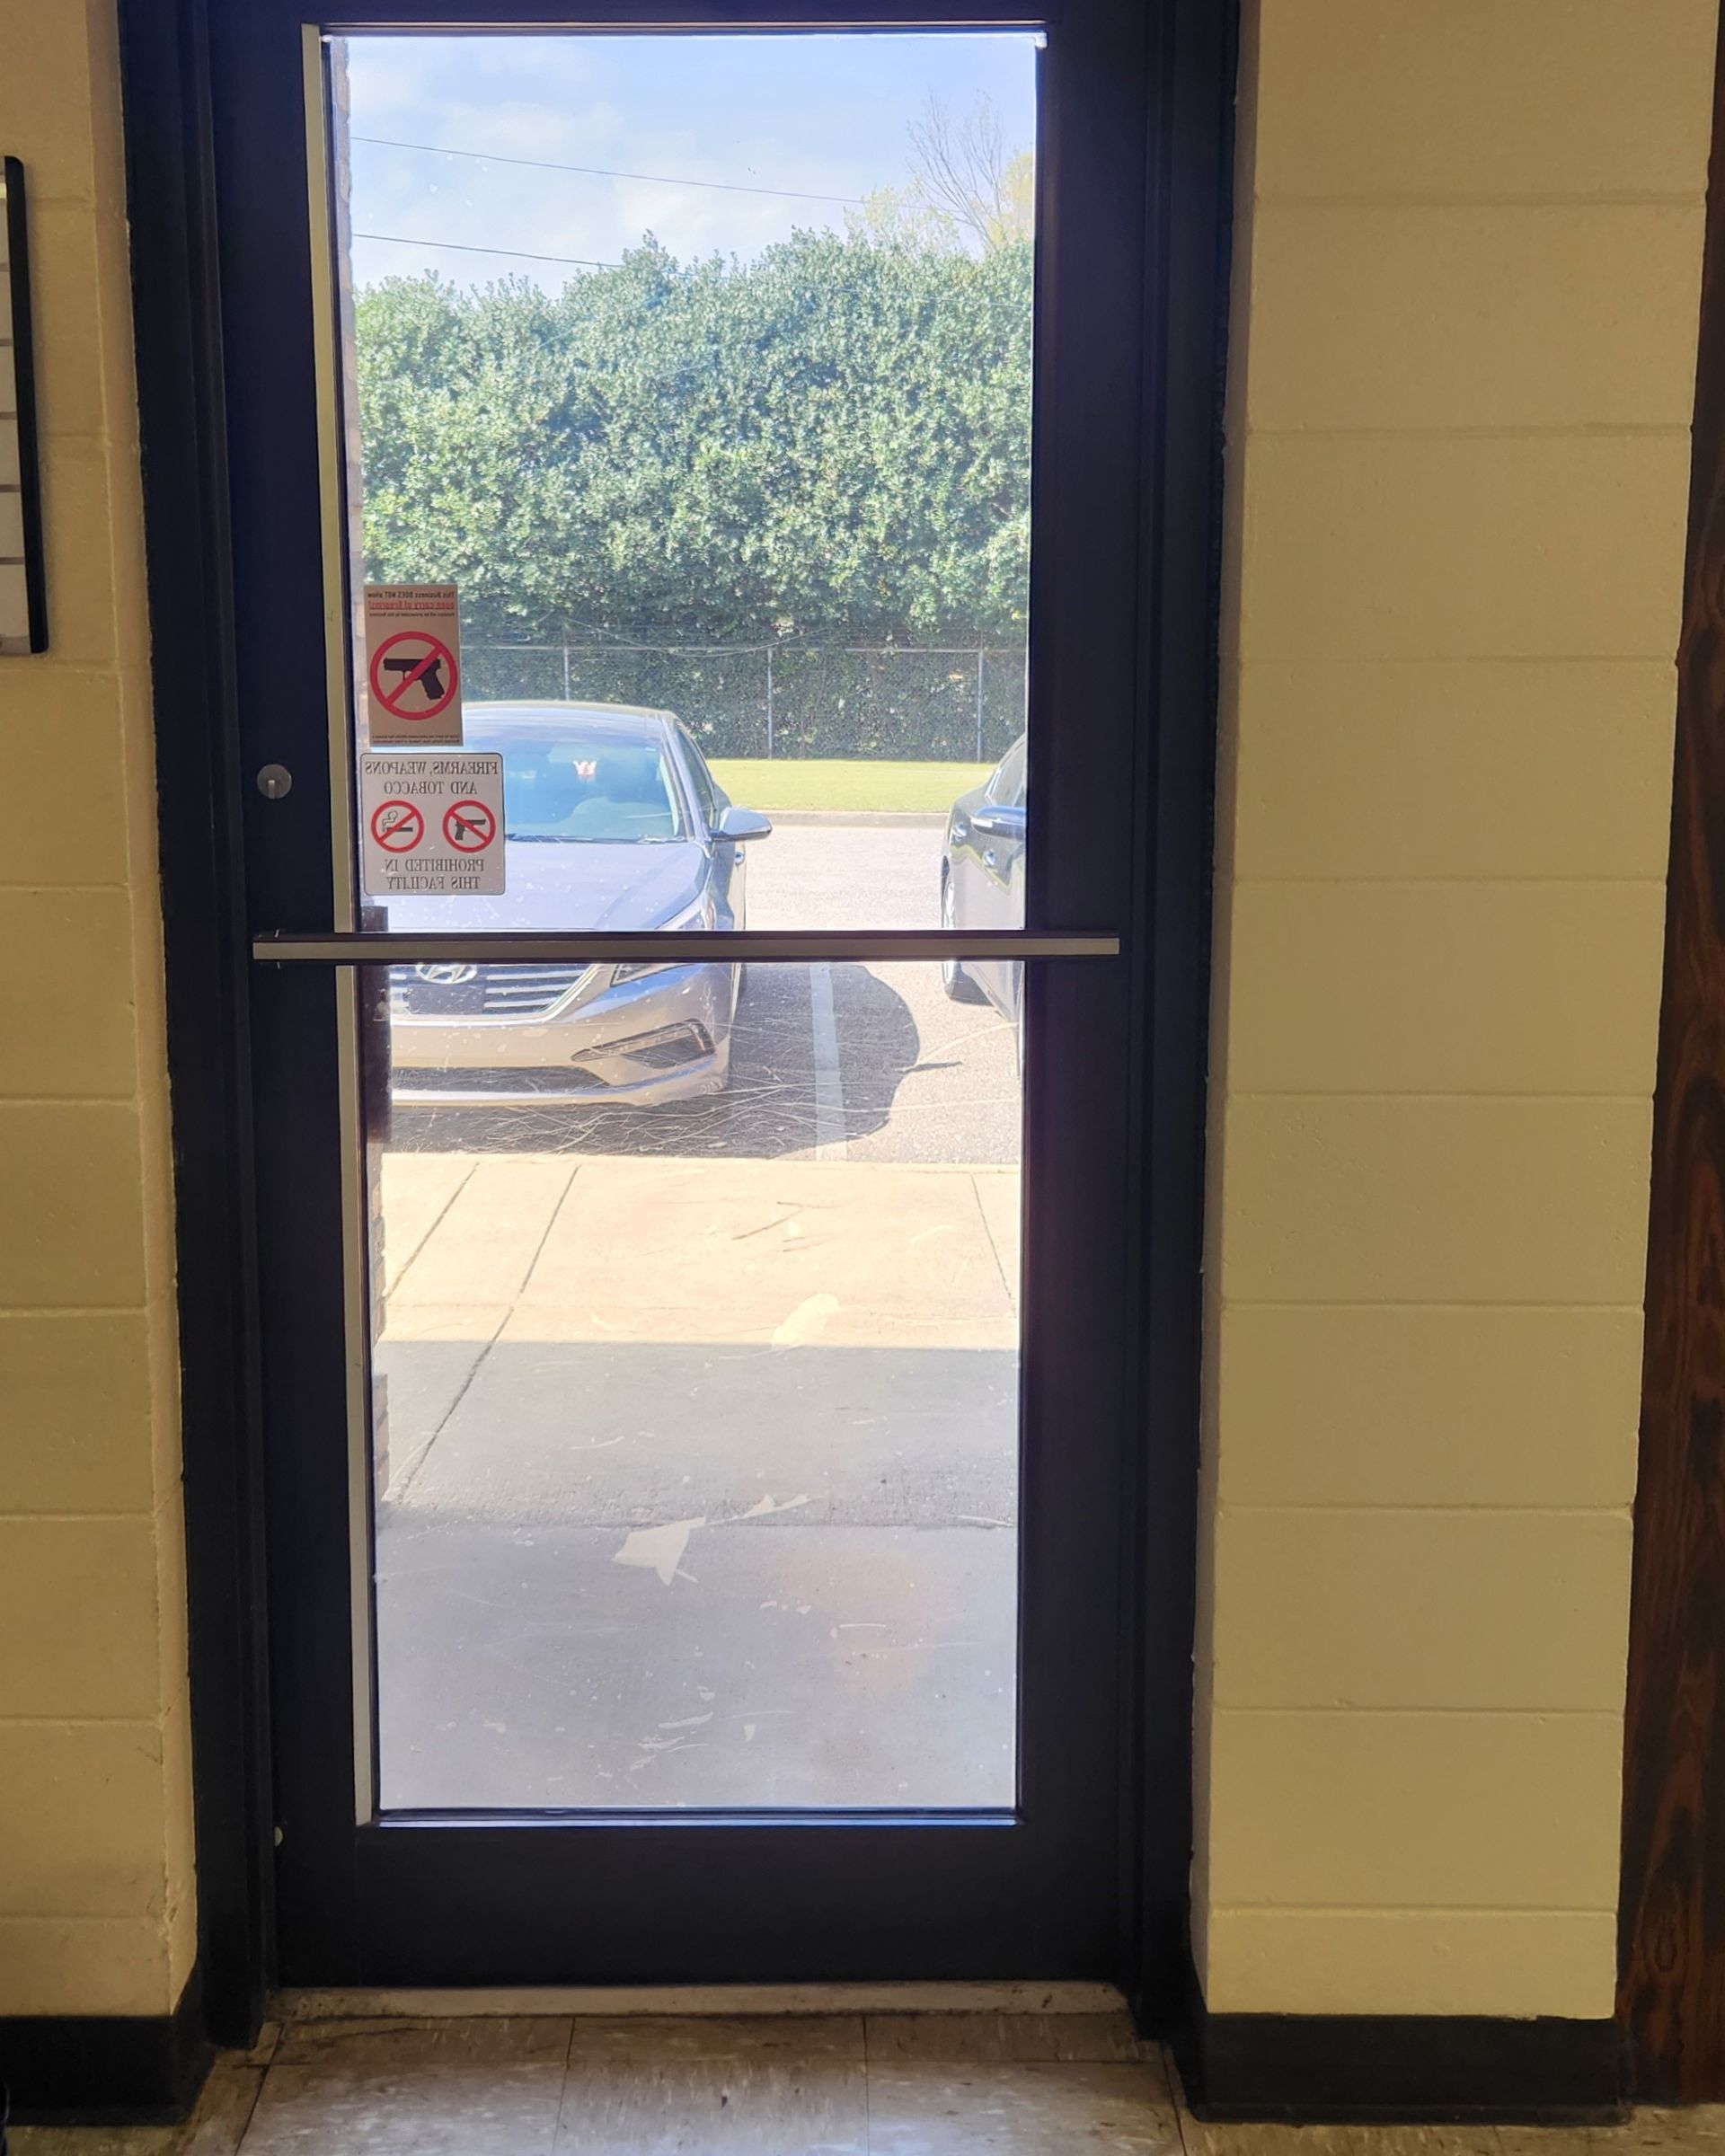 Sun blocking window tint - Bright Sun and Alabama heat over-powered the generic foreign tint causing it to crack and fail in performance. Before replacing with real SPF Tint blocking maximum heat for good. Montgomery AL